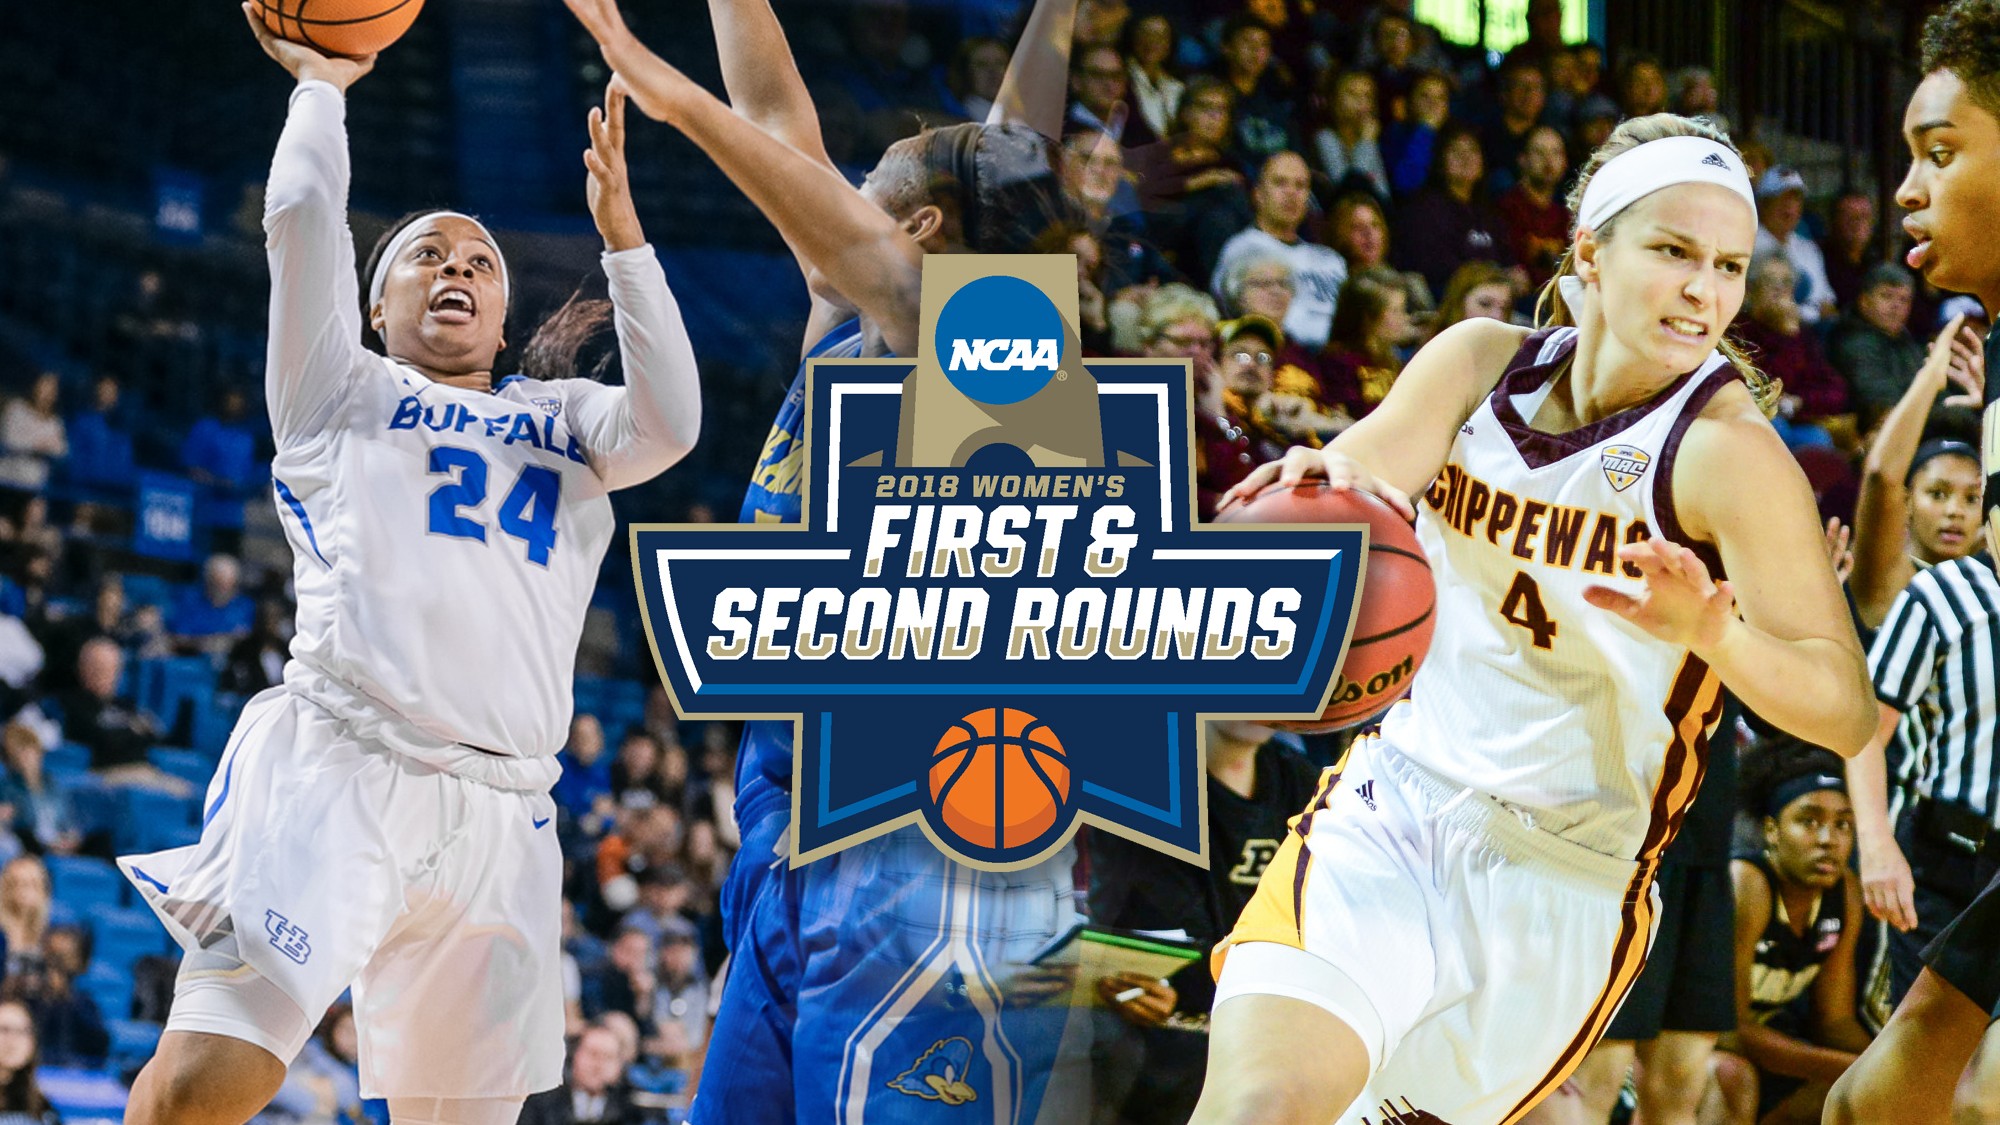 Buffalo and Central Michigan Set for NCAA First Round